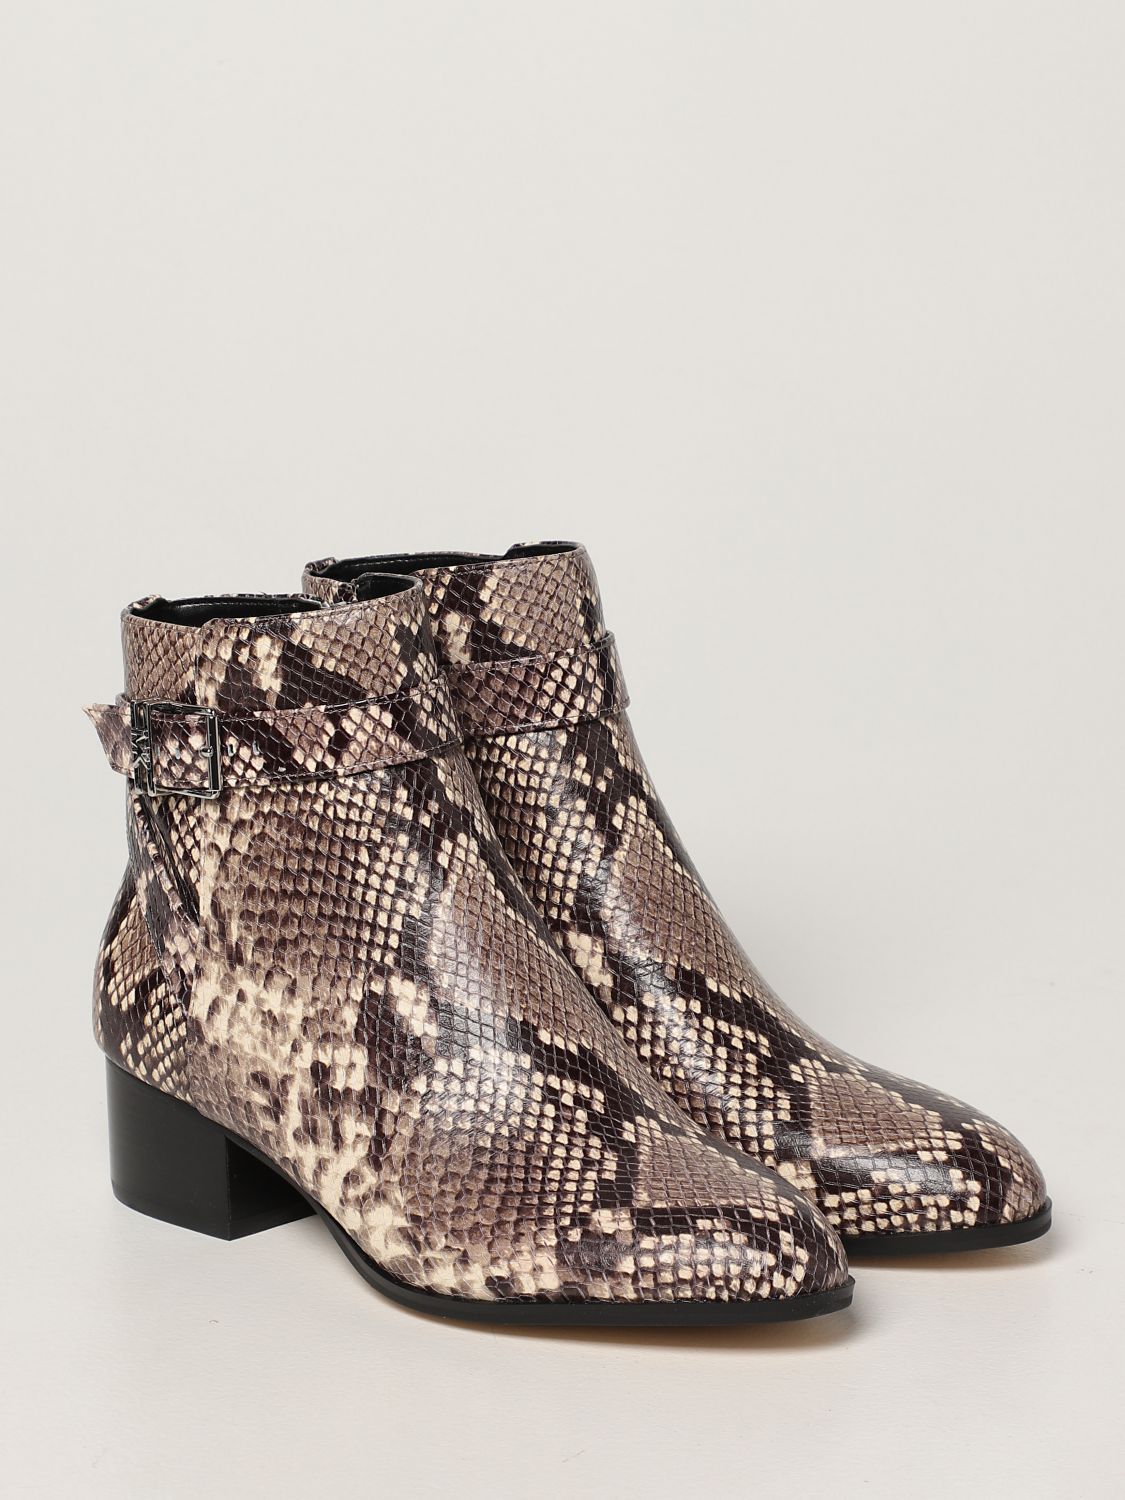 MICHAEL KORS: Britton Michael ankle boot in leather with python print -  Natural | Michael Kors flat booties 40T1BTMB5E online on 